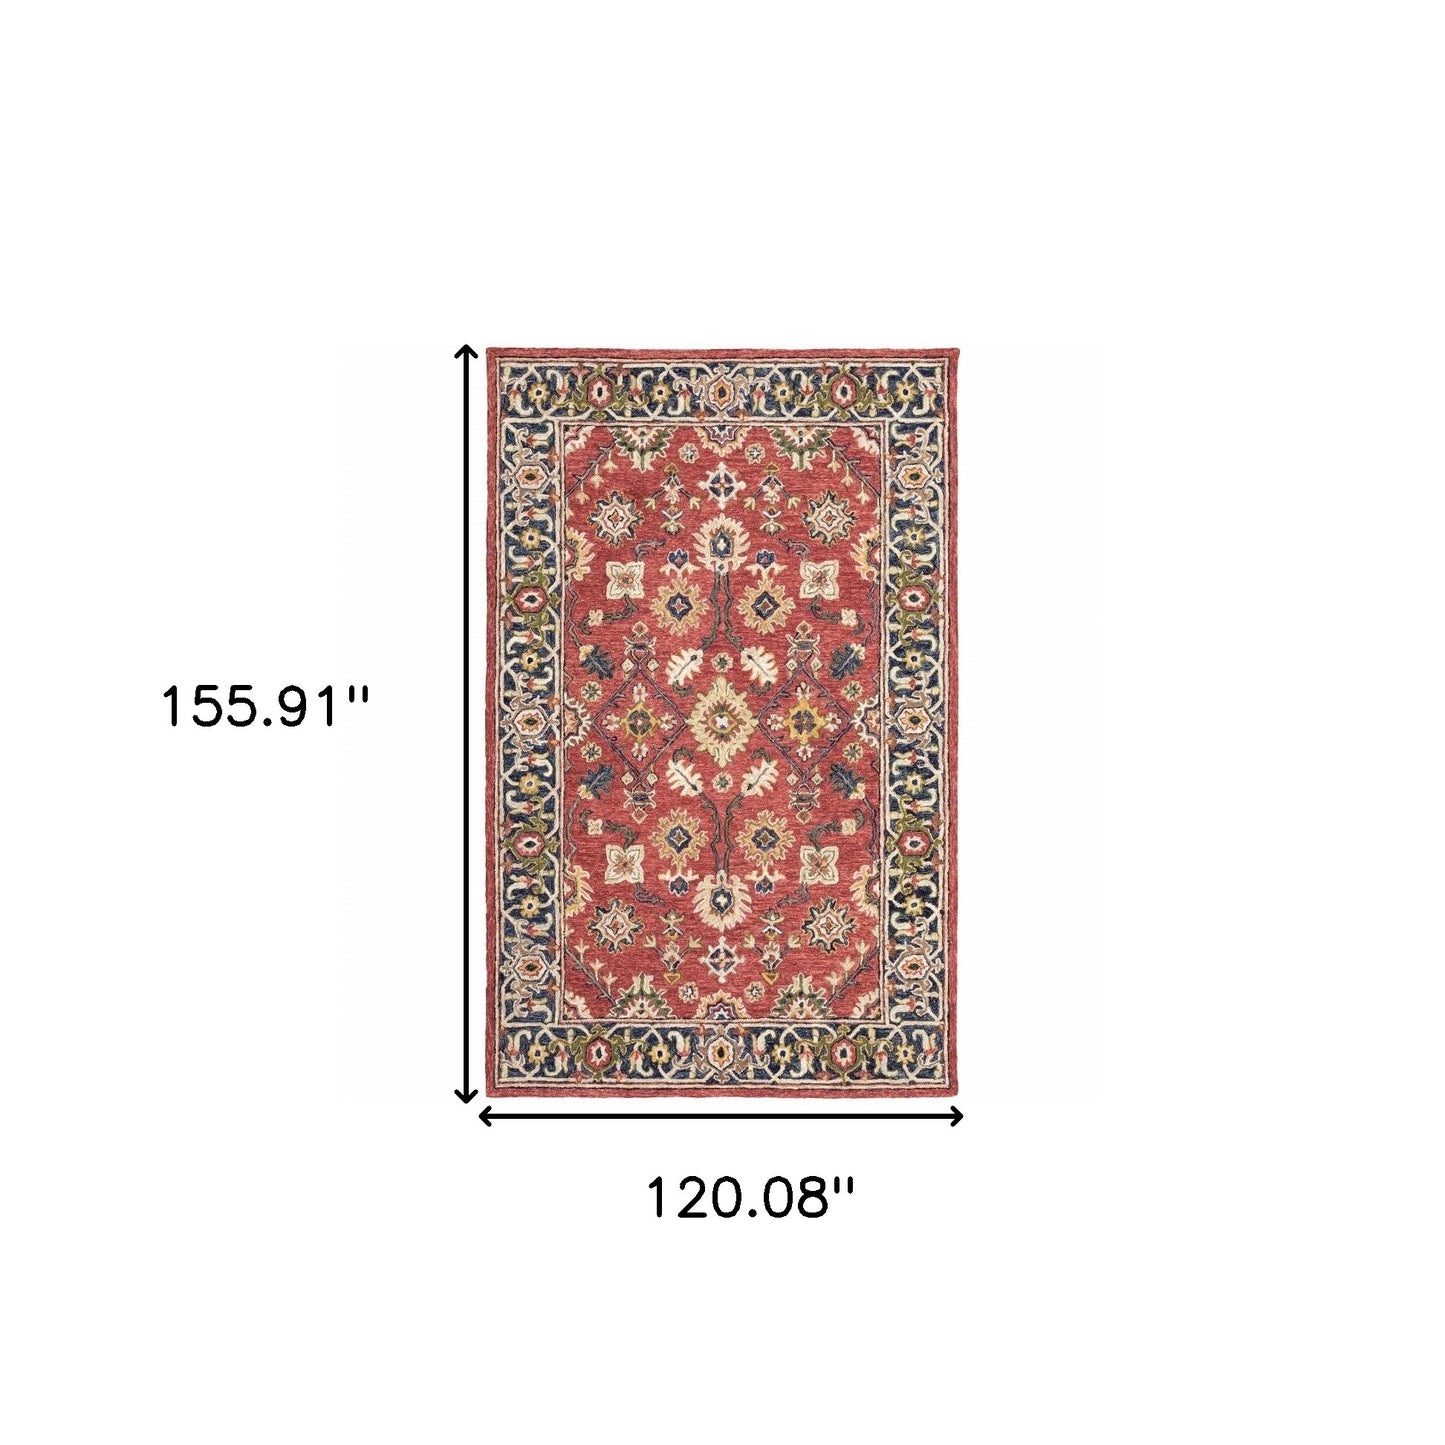 10'X13' Red And Blue Bohemian Rug